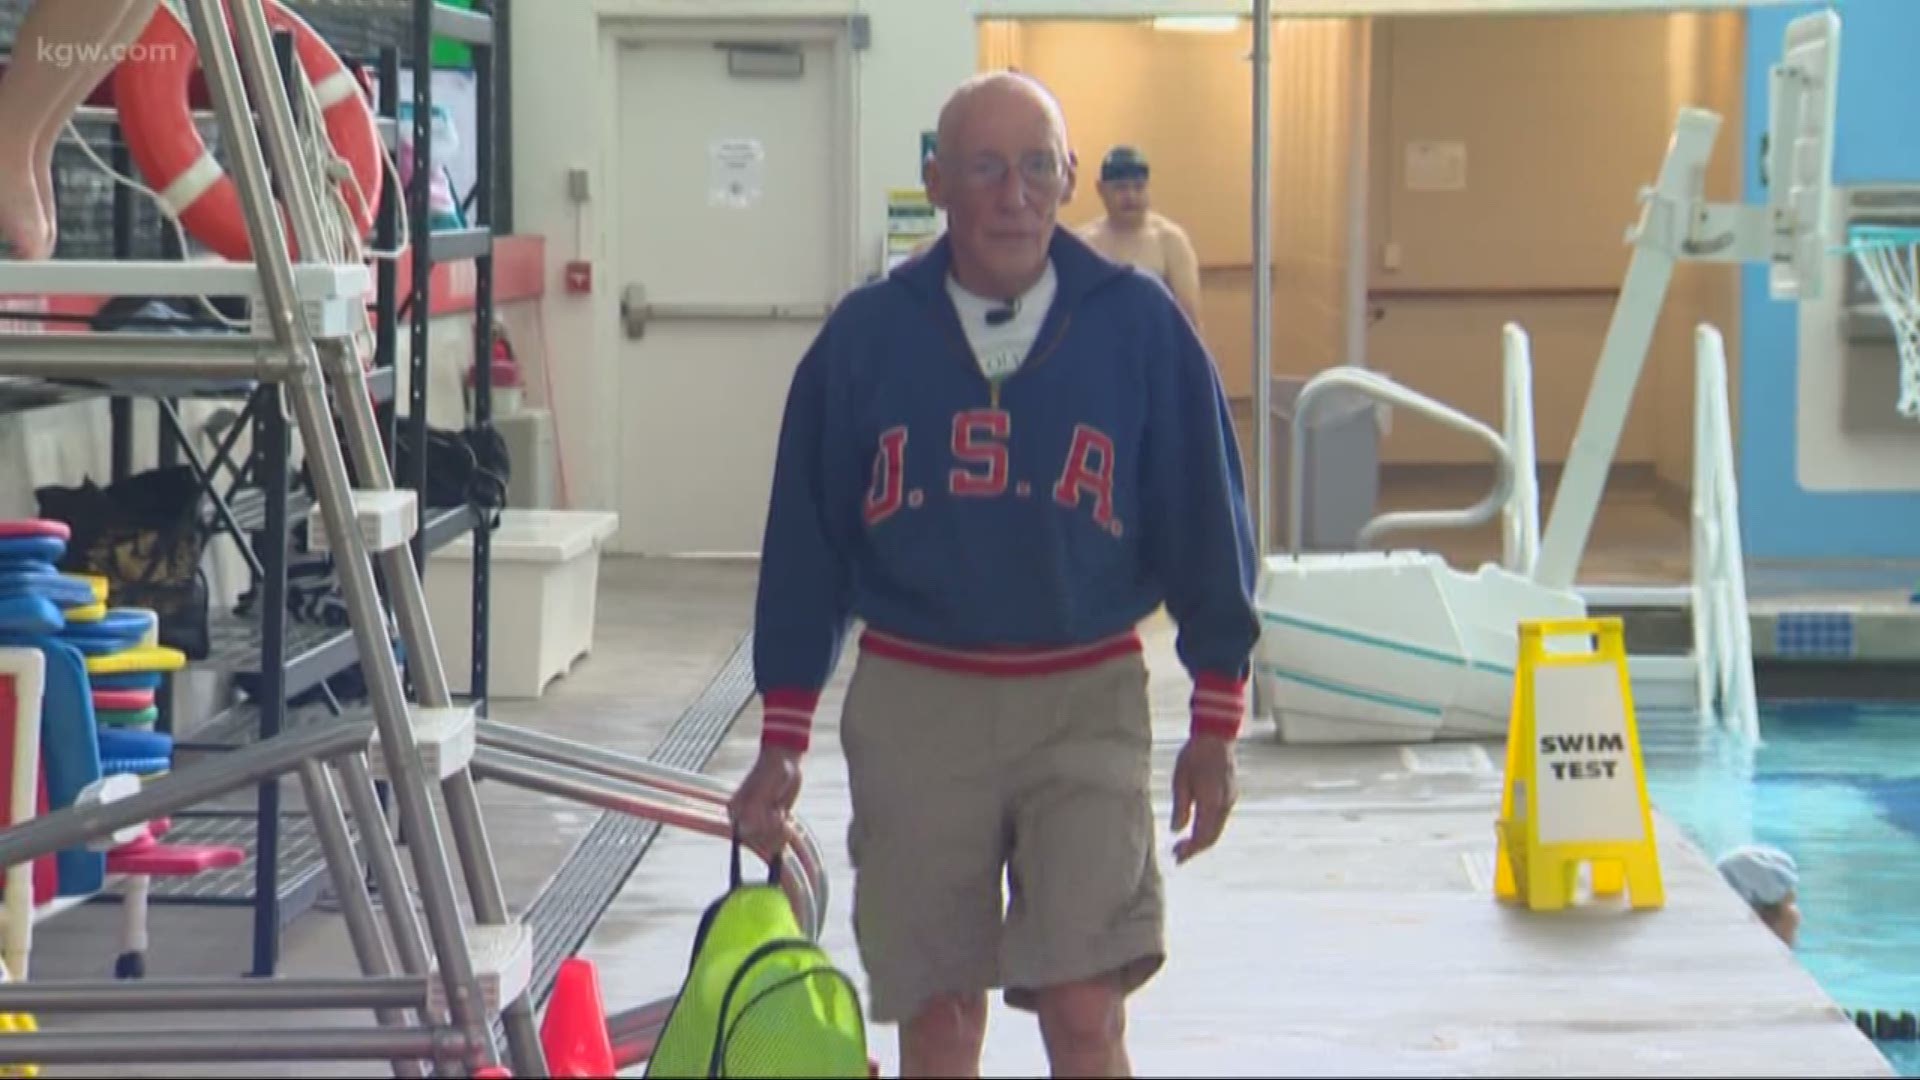 Dave Radcliff swam in the 1956 Olympics and still races. He holds a number of Masters world records. “I’m a strong believer in that saying use it or lose it,” he told KGW at a recent workout.